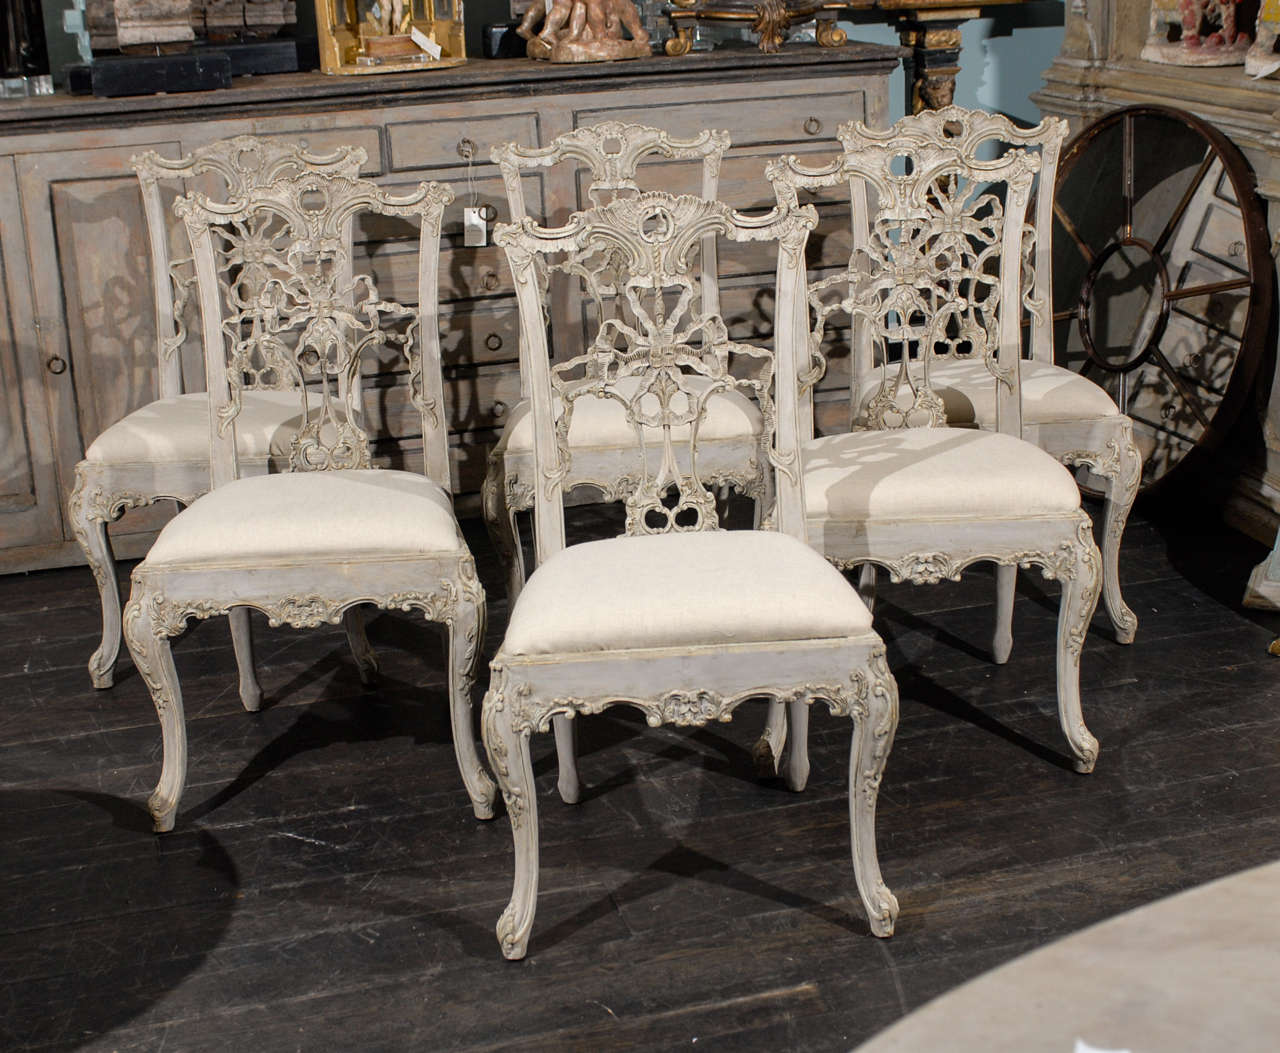 A Set of 10 Italian Painted Wood Chippendale Style Side Chairs with Carved Cabriole Legs. They have, in the typical Chippendale Style, Wonderfully Carved Backs, Crests and Ears and Nicely Carved Skirt. The photo shows only 6 but there are 10 indeed.